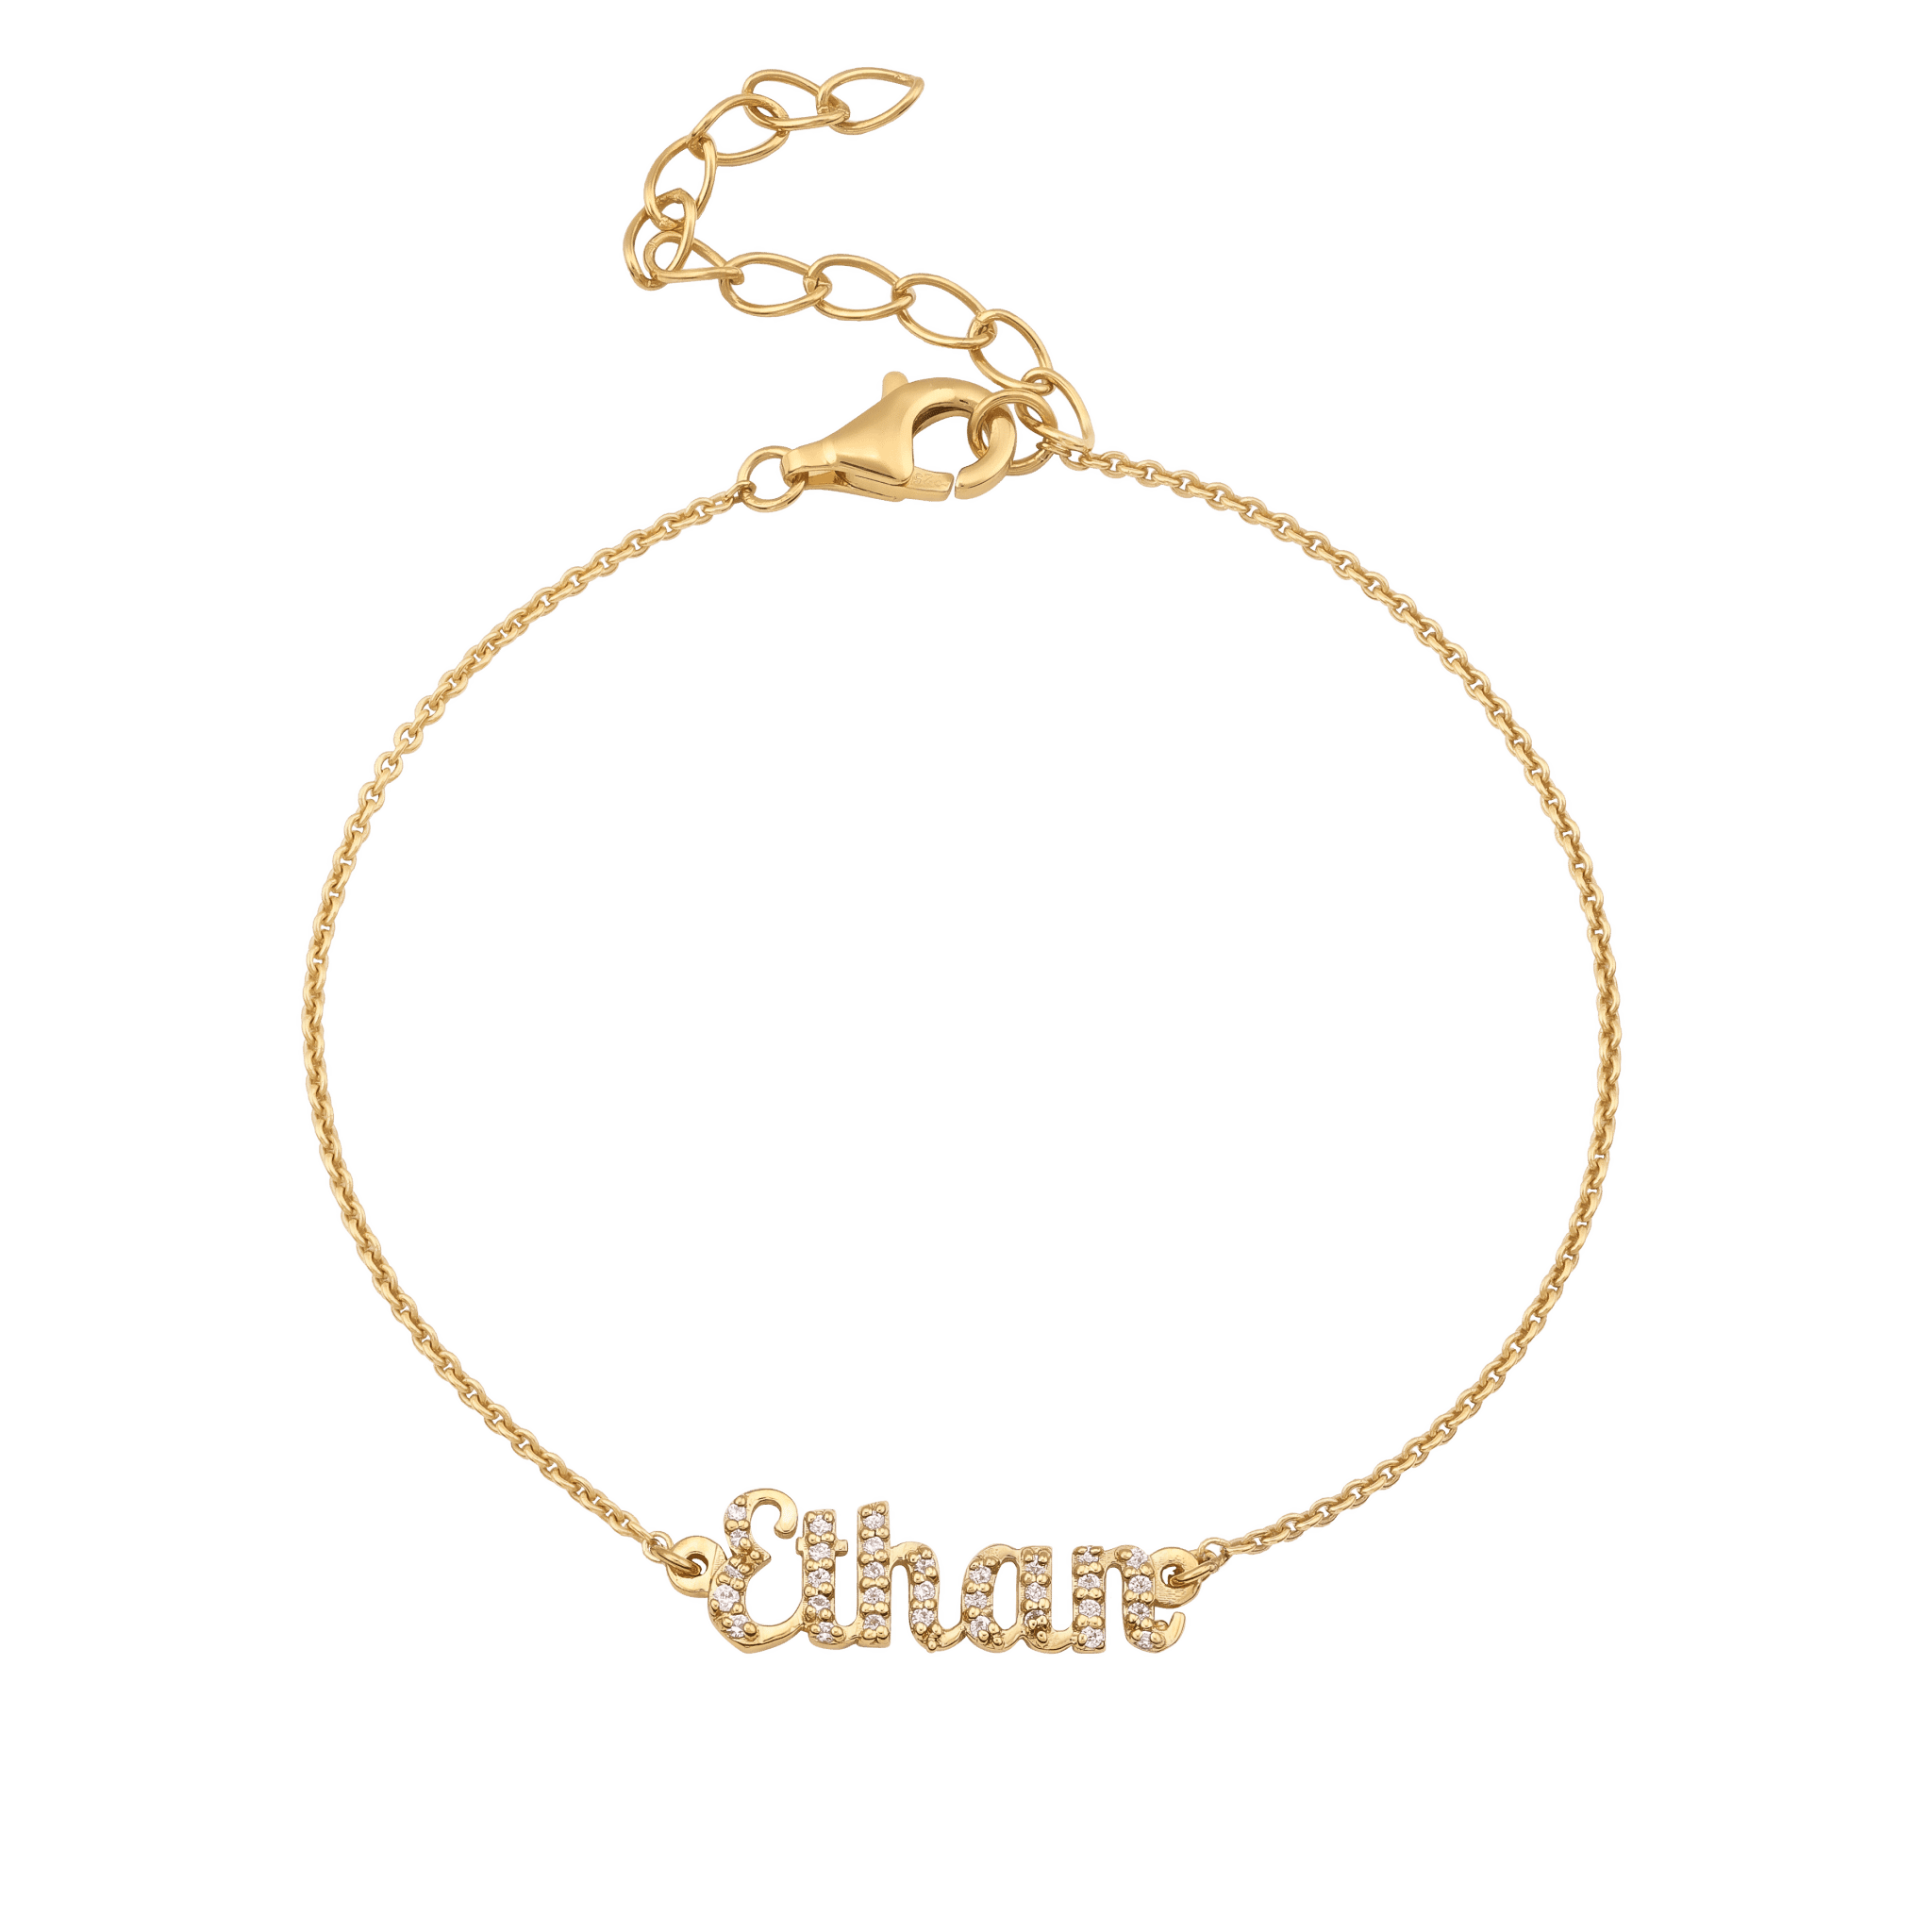 Christmas Gift for Her - Name Bracelet with Capital Letters in 18K Gold Vermeil